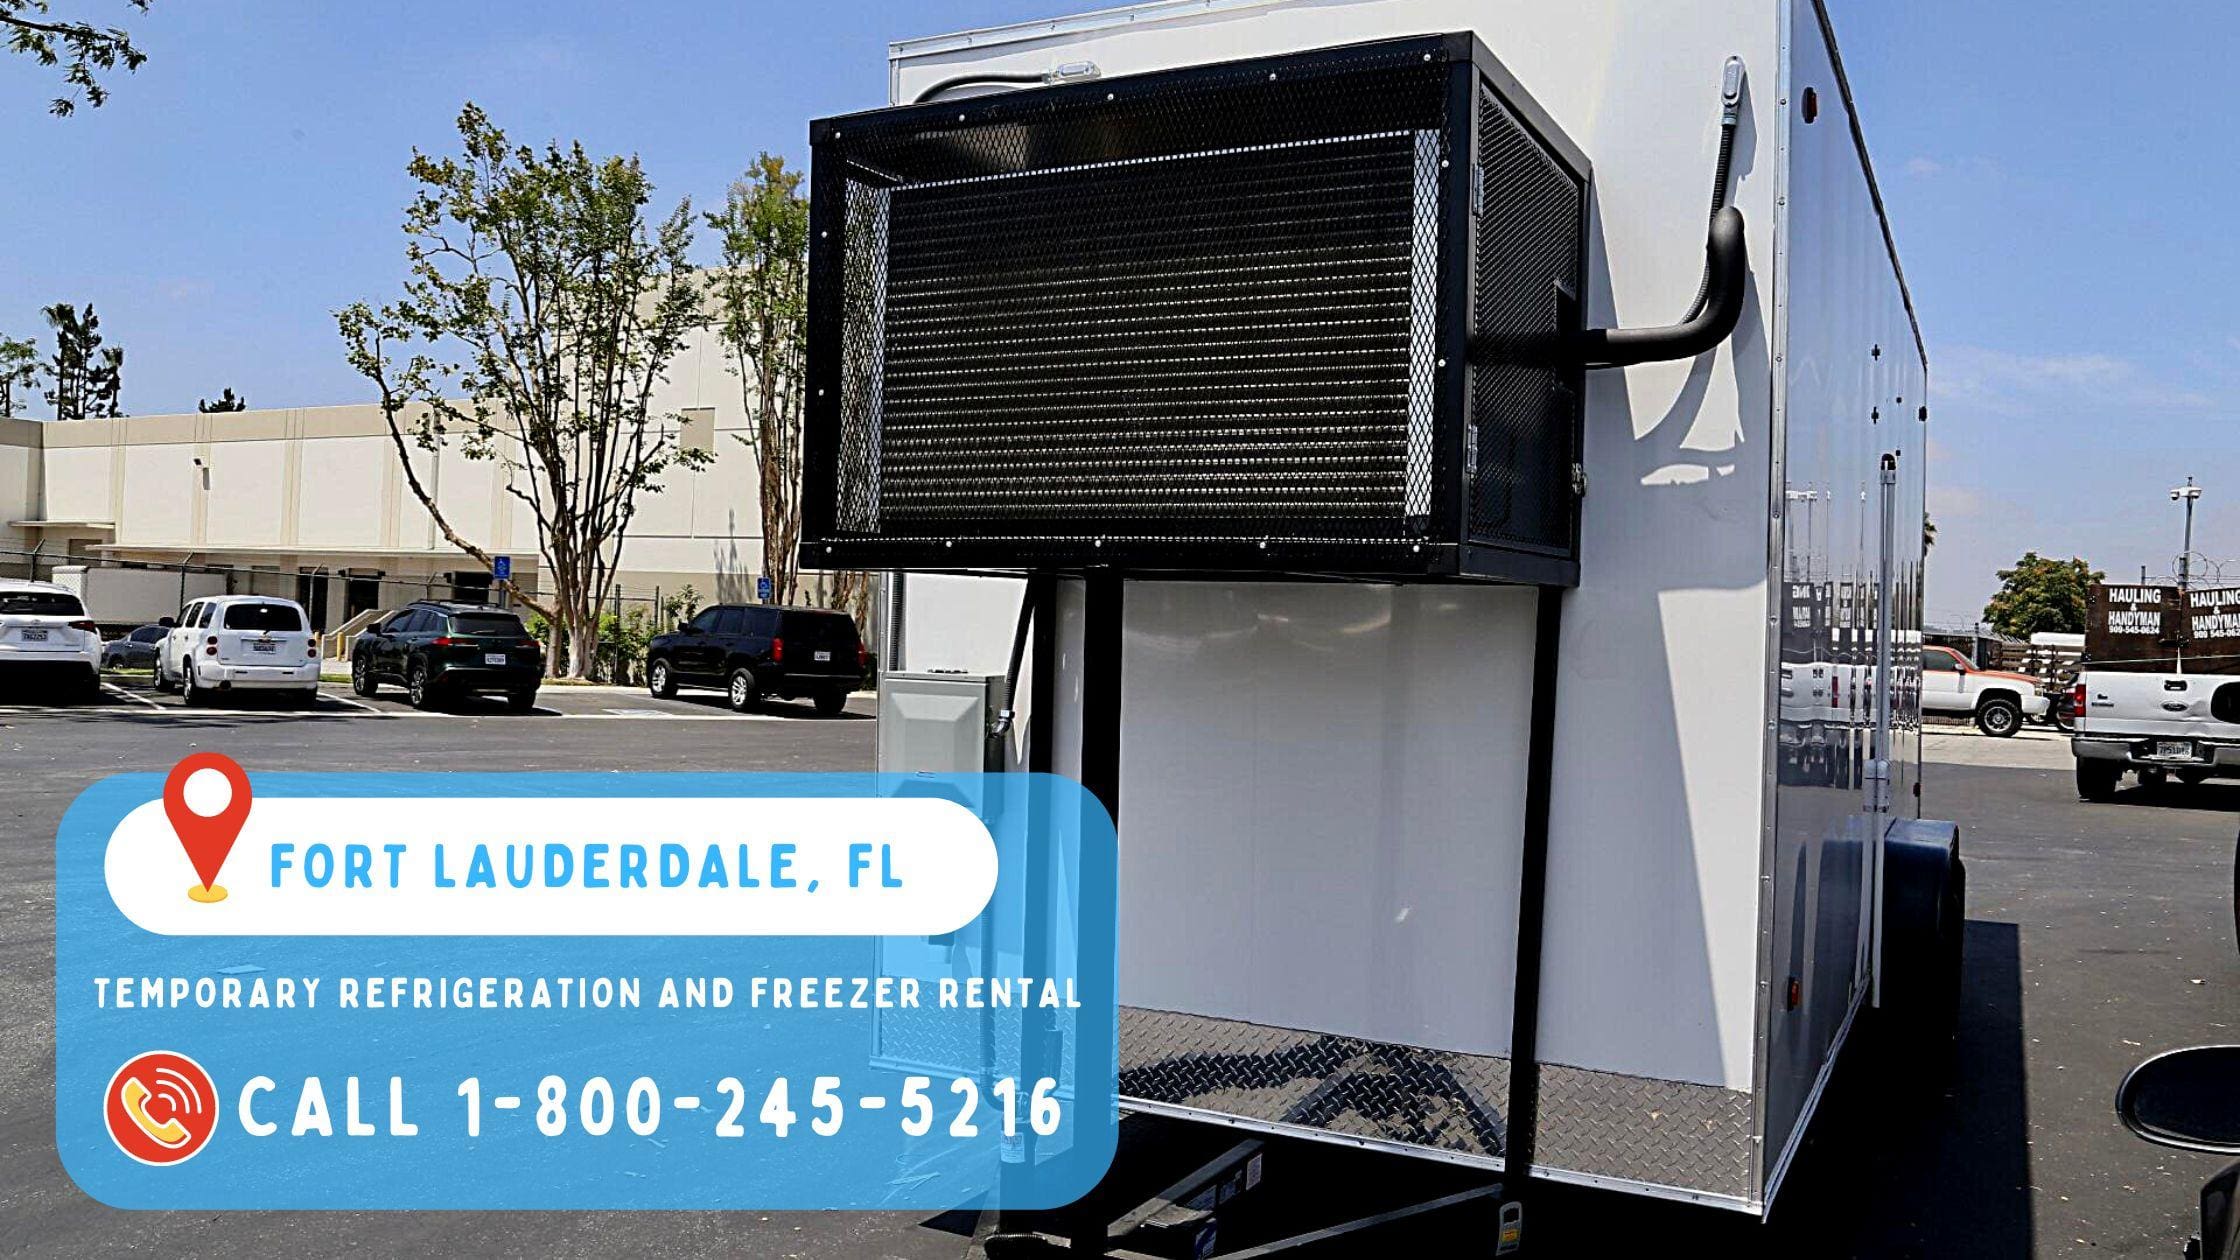 Temporary Refrigeration and Freezer rental in Fort Lauderdale